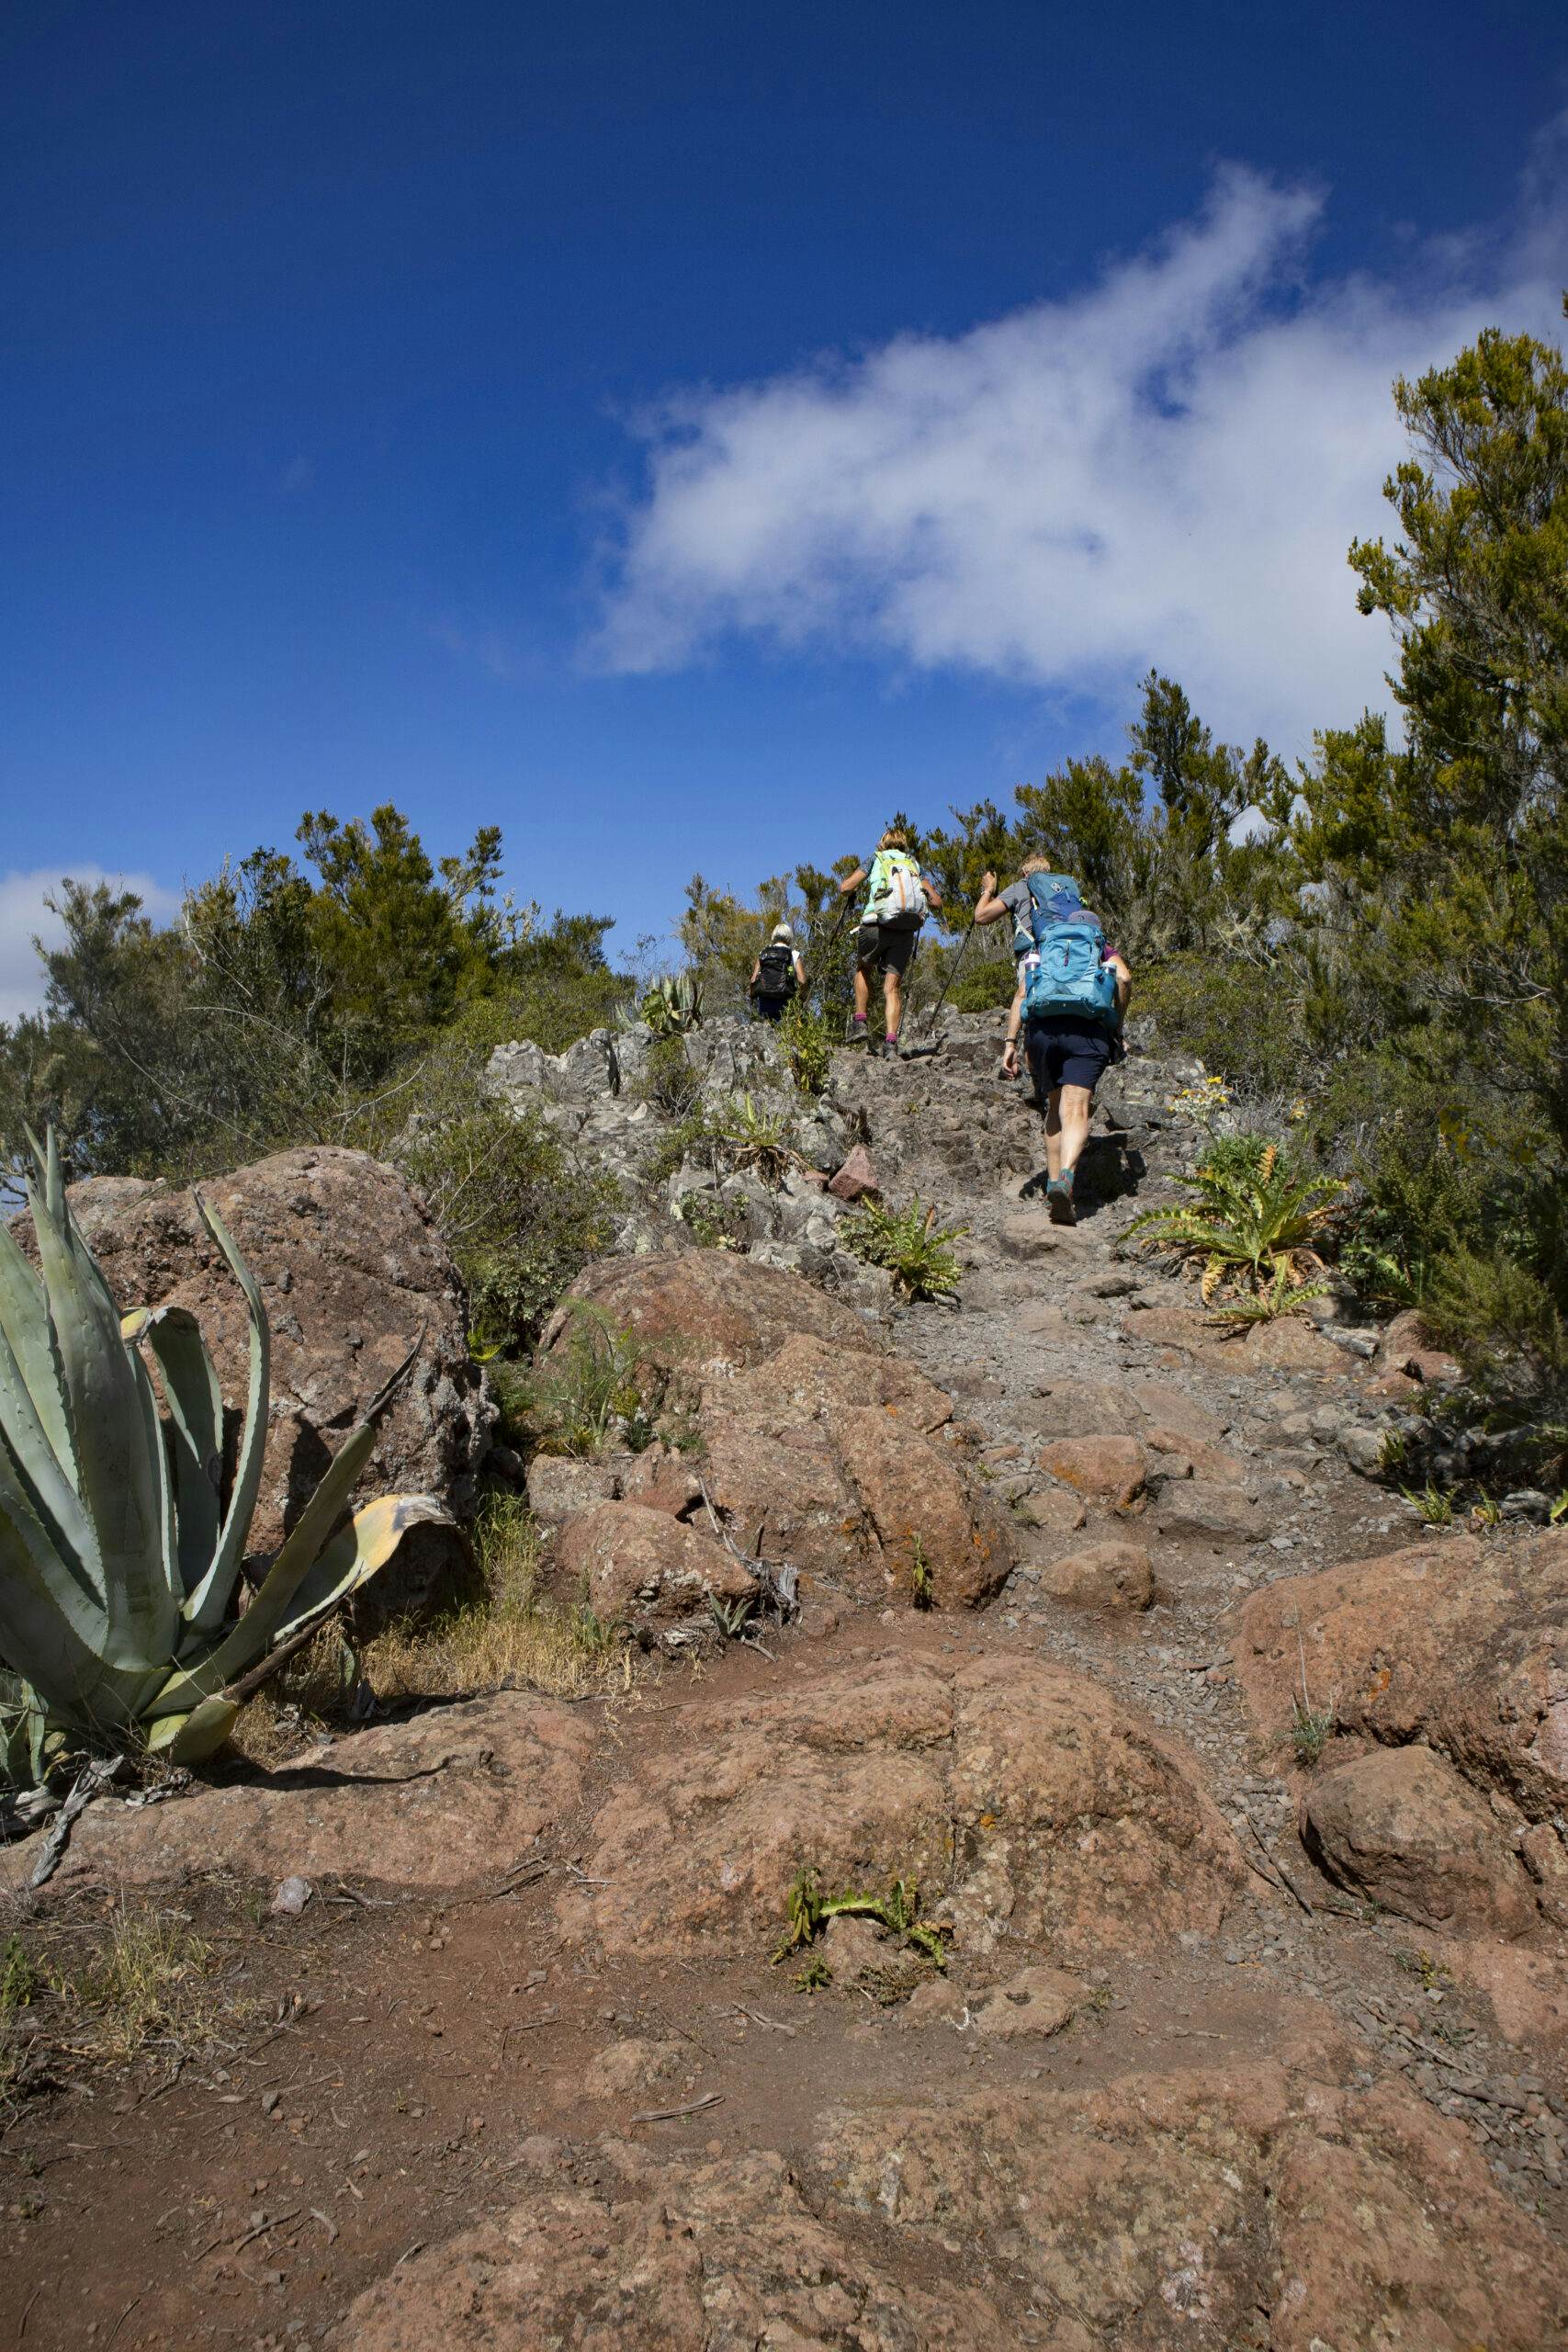 Hikers on the ascent path behind the El Palmar junction to the summit path